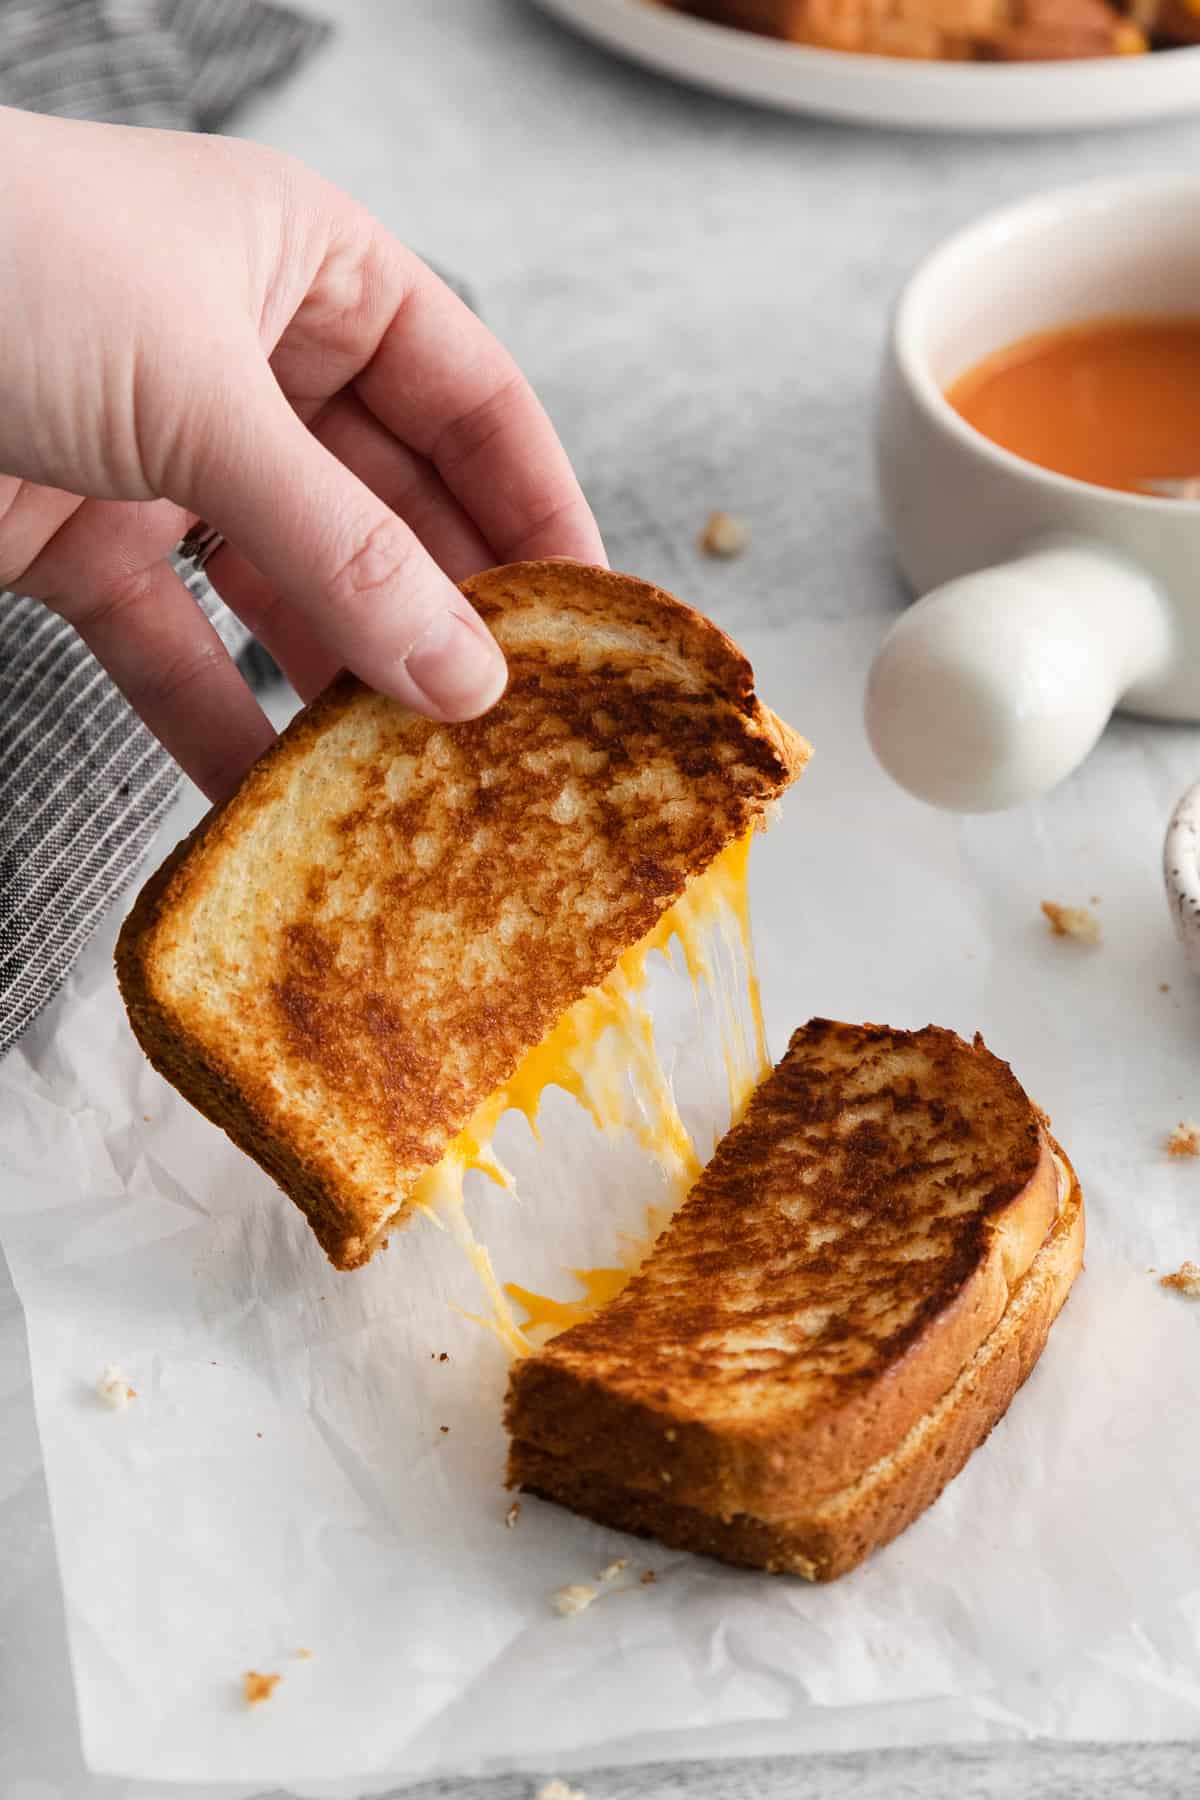 Grilled cheese with mayo sliced in half.